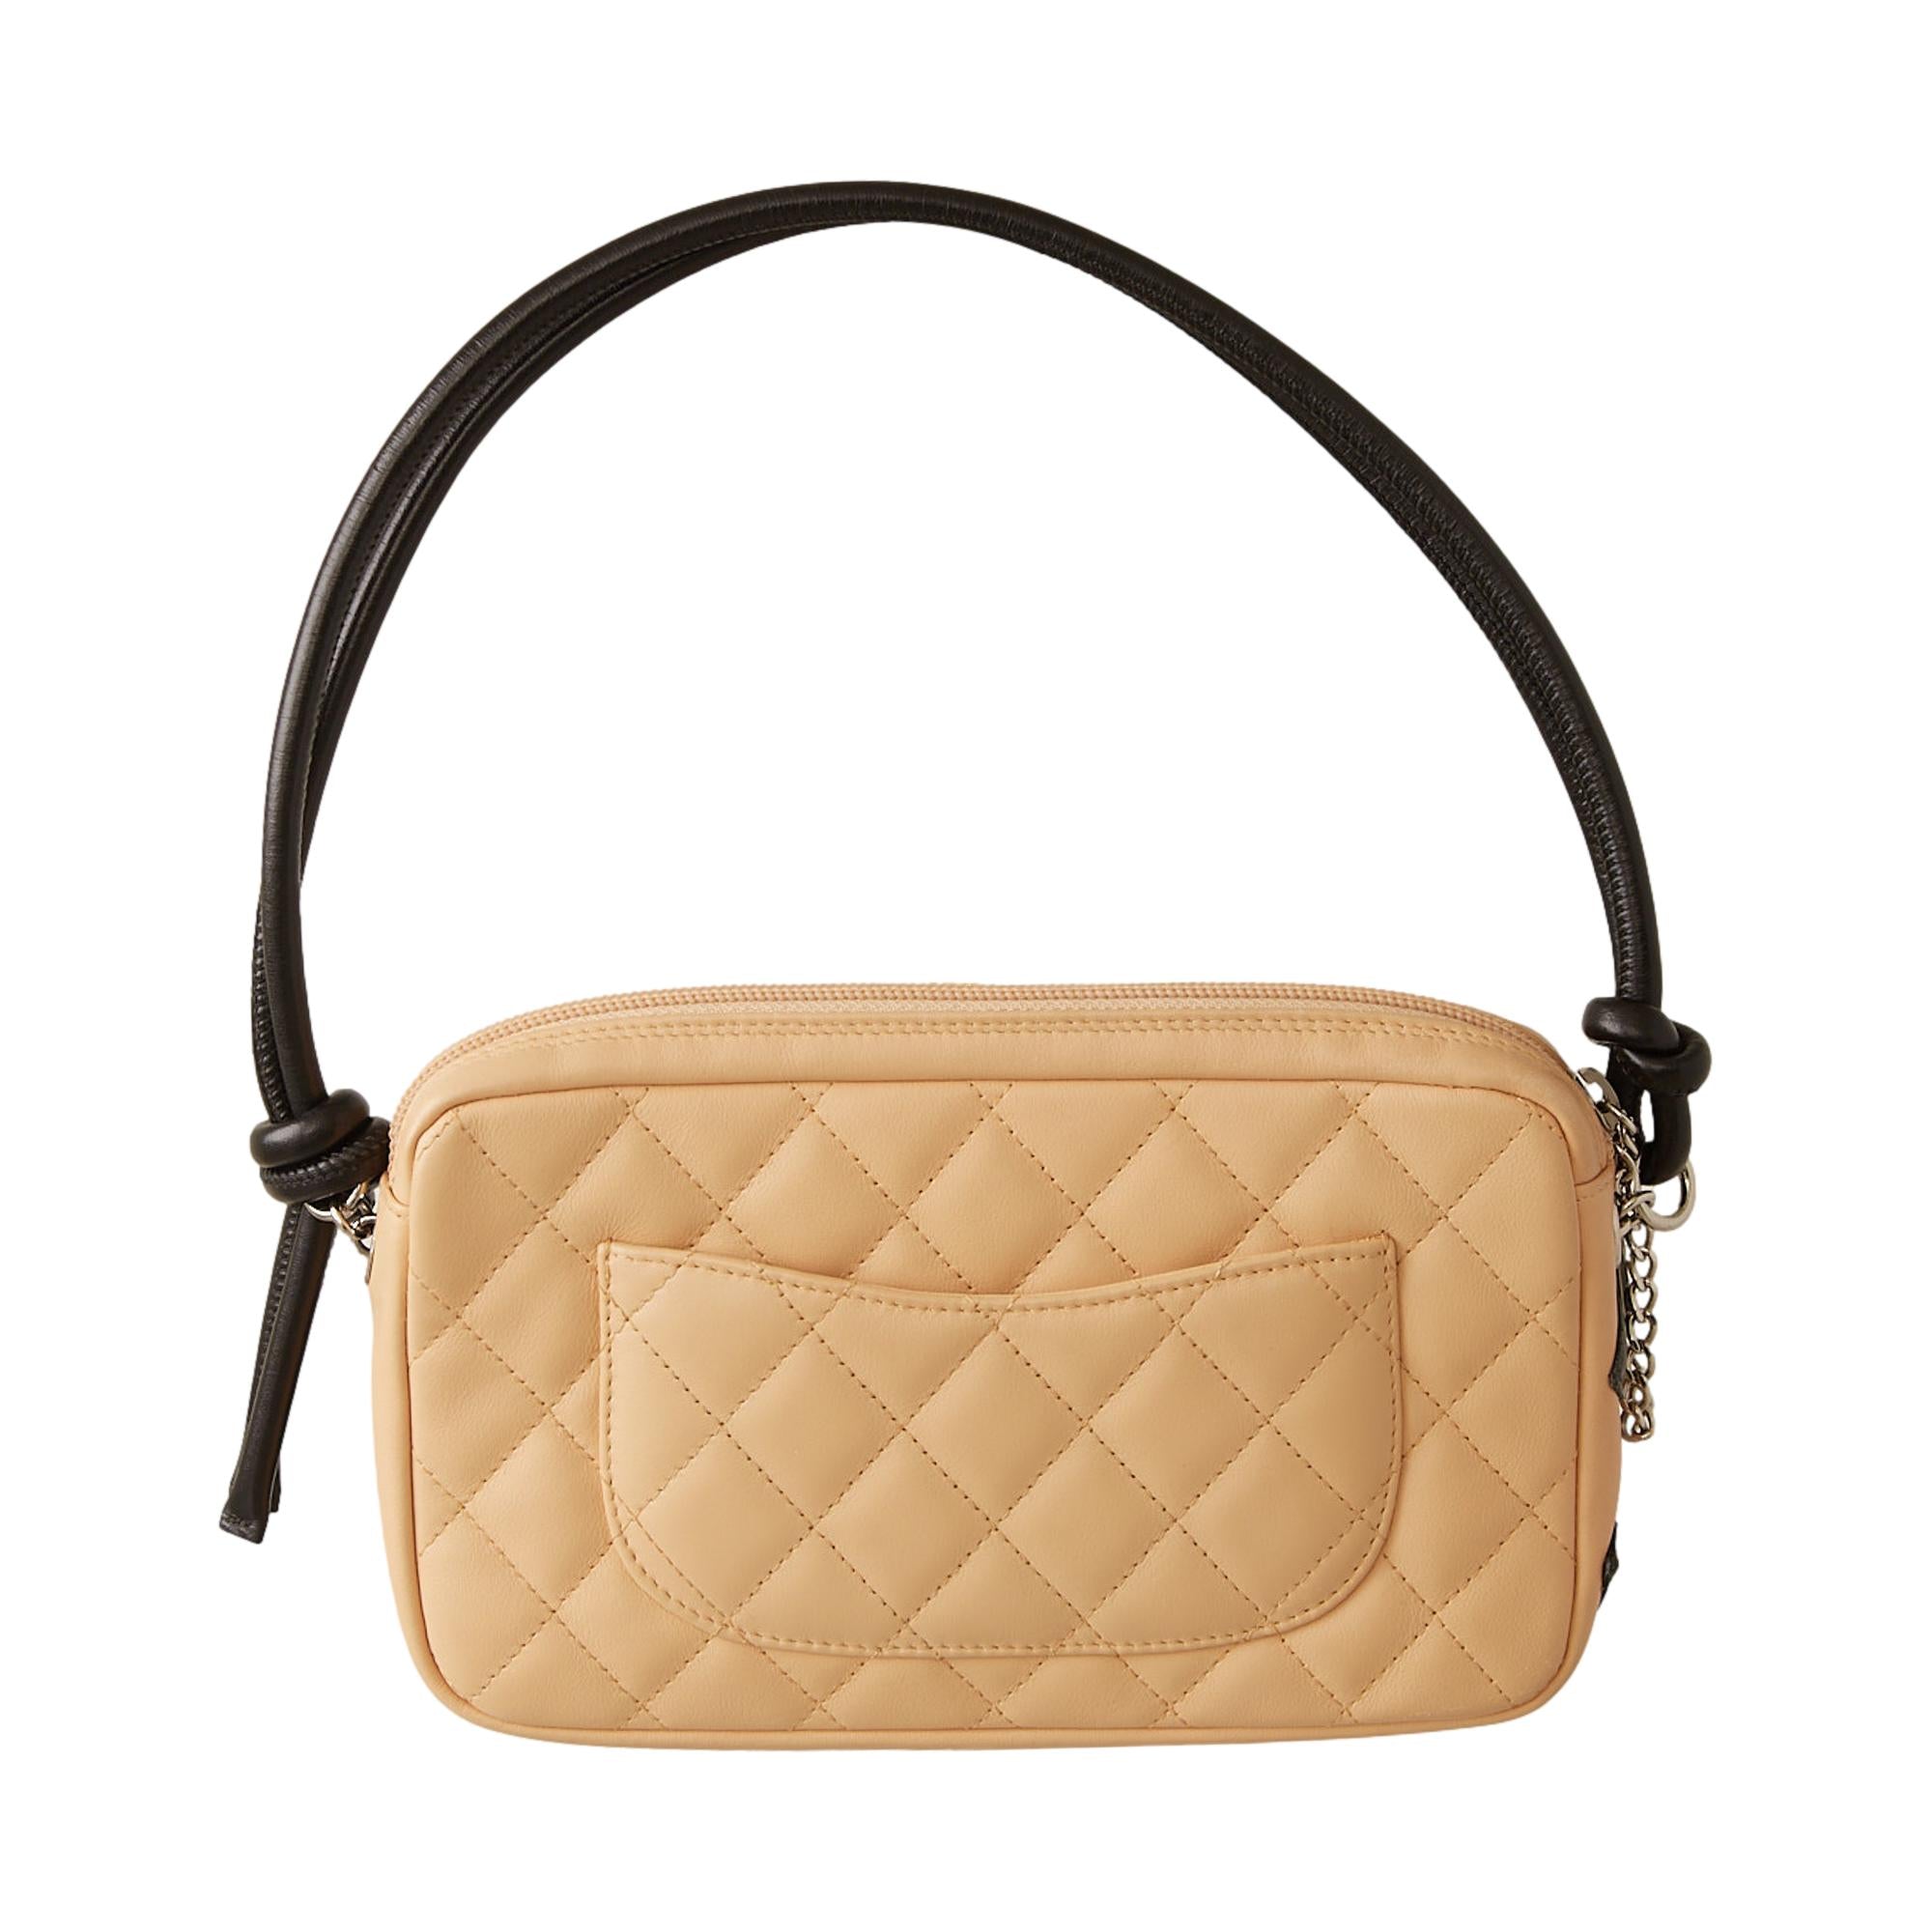 Chanel Tan Quilted Cambon Shoulder Bag